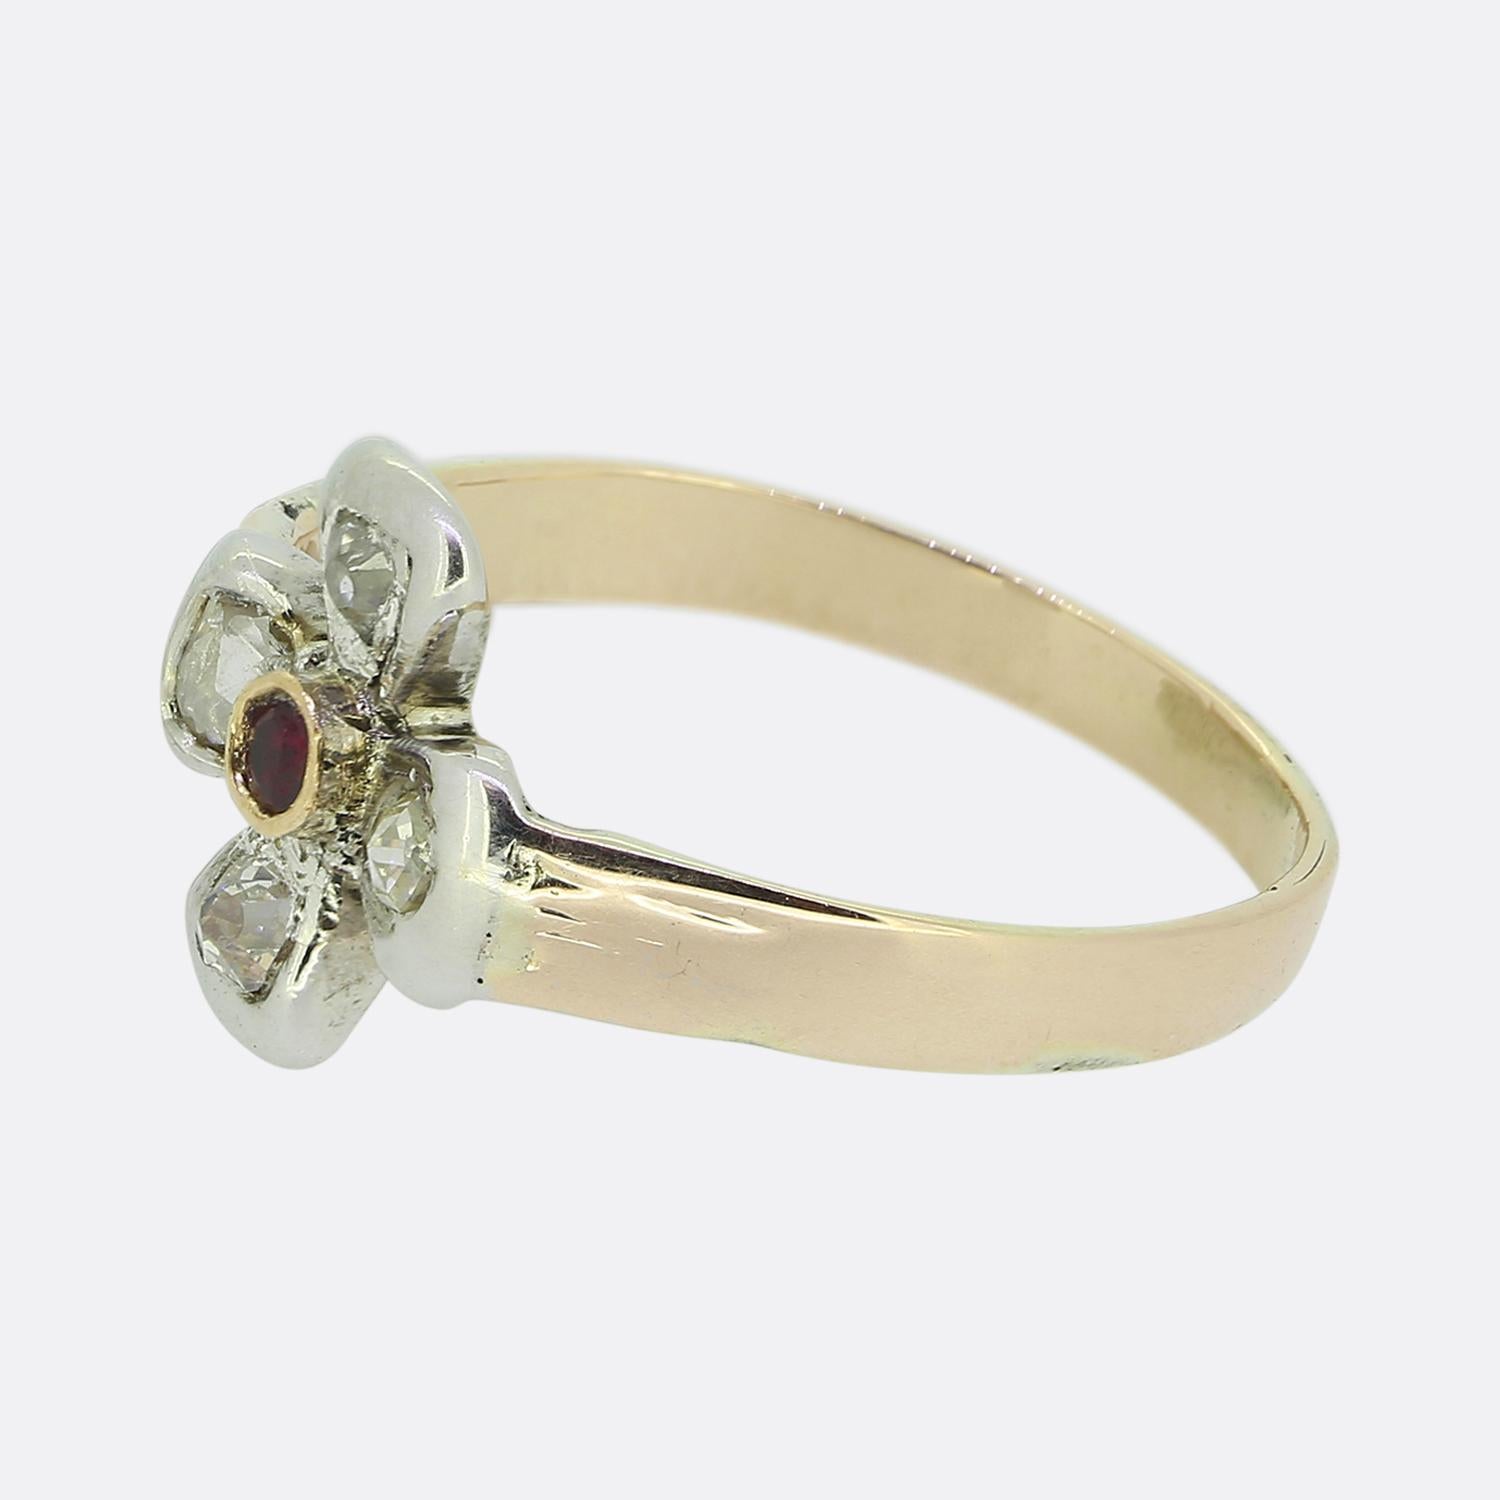 Here we have a lovely ruby and diamond ring. The face of this vintage piece has been crafted from 9ct white gold into the shape of a flower head with each petal-like setting playing host to a single natural diamond; two of which are old cut cuts